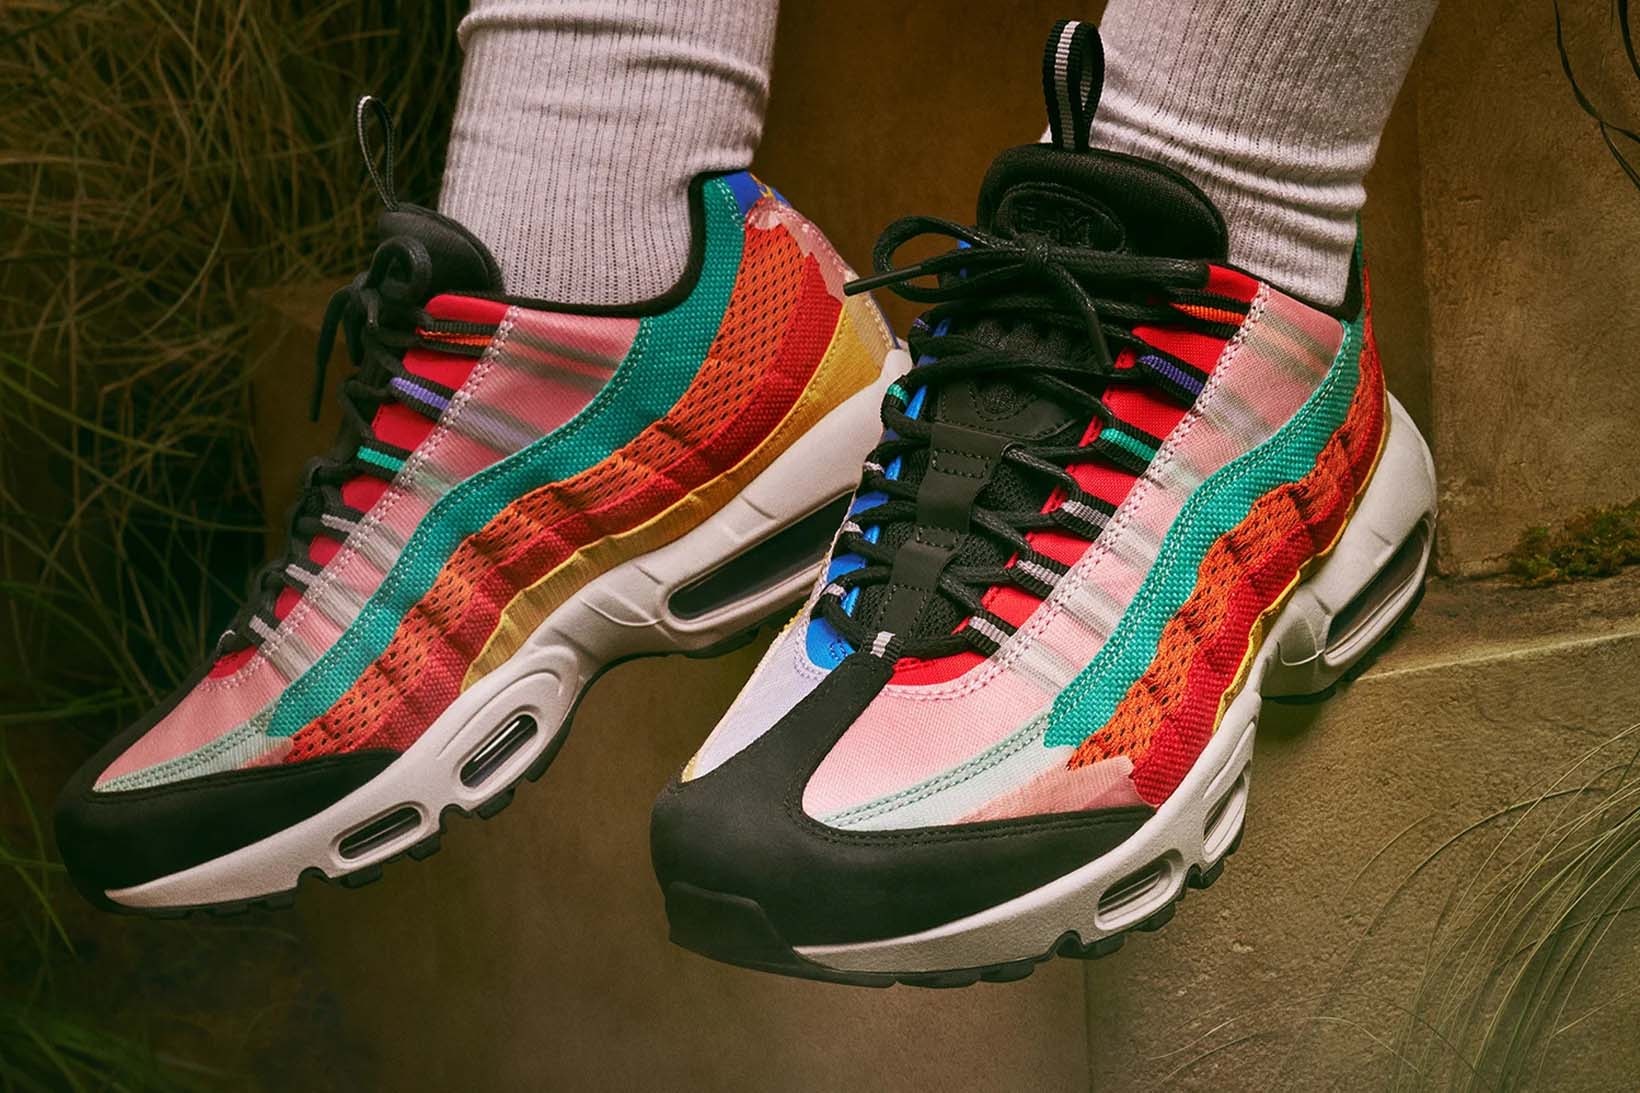 Black History Month Sneakers Nike Air Max 95 BHM